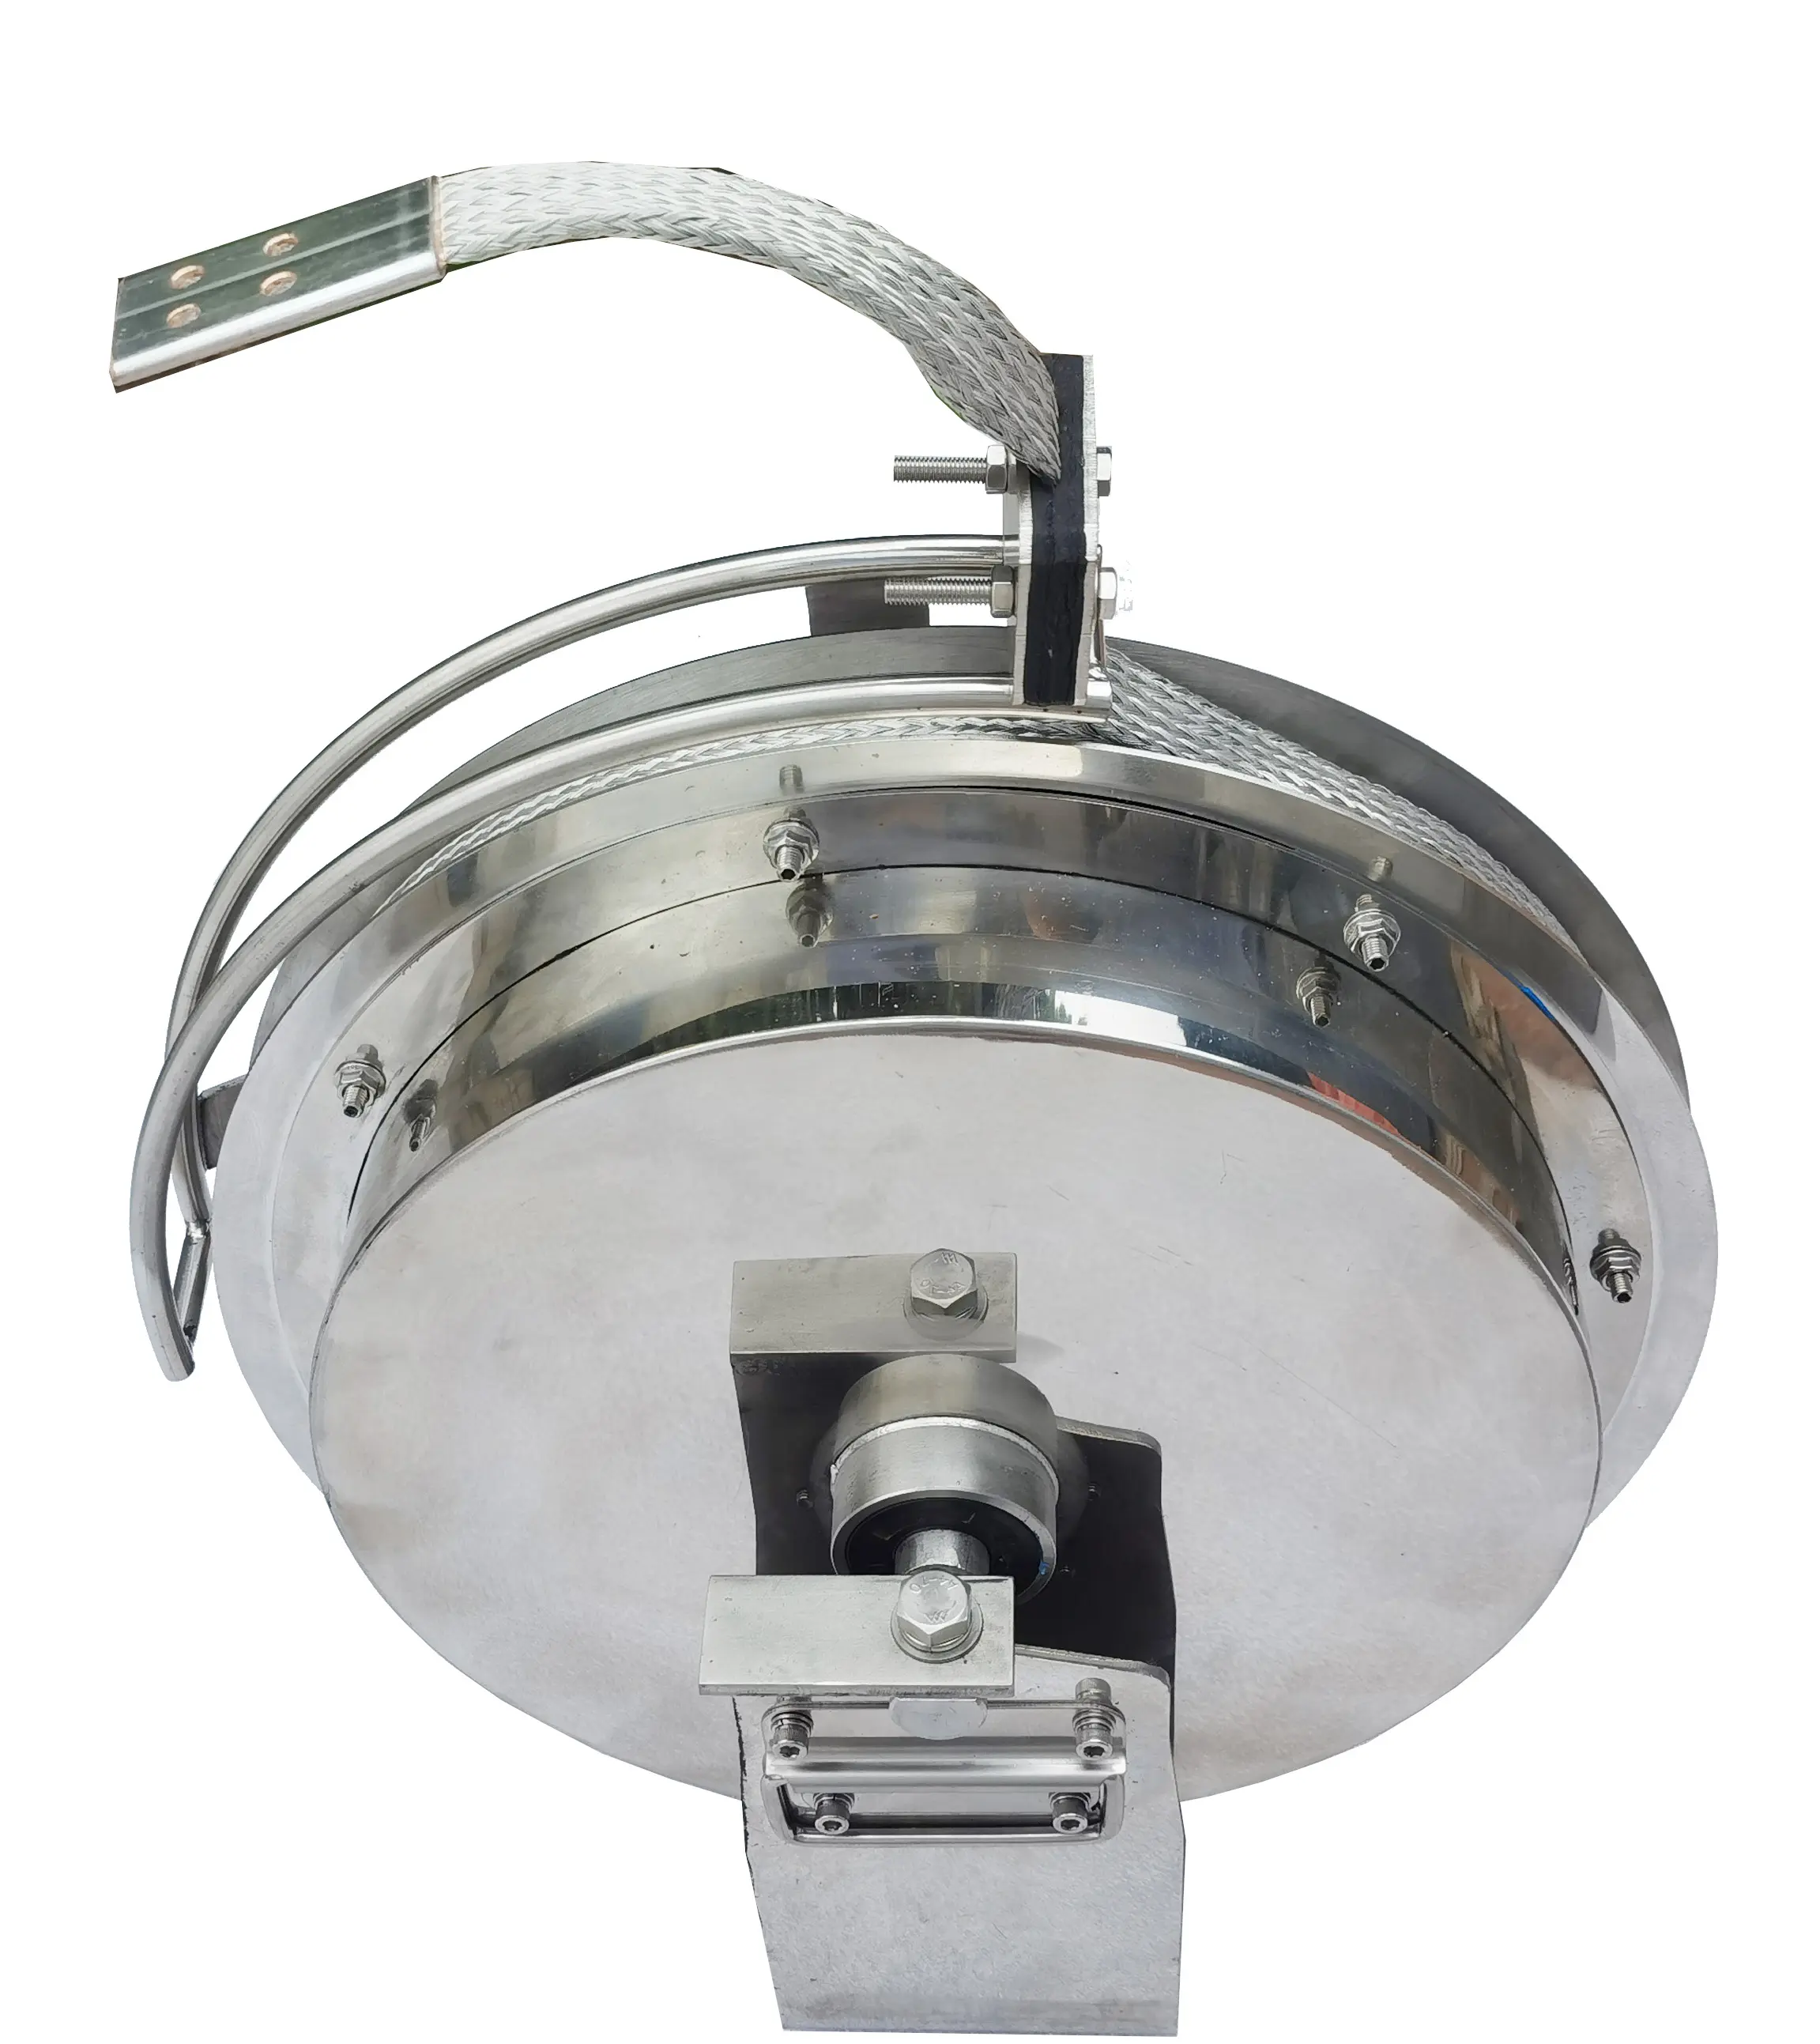 Retractable/Rewinder Anti-Static Earthing/Grounding Reel With Bypass Conductor For Floating Roof Storage Tanks